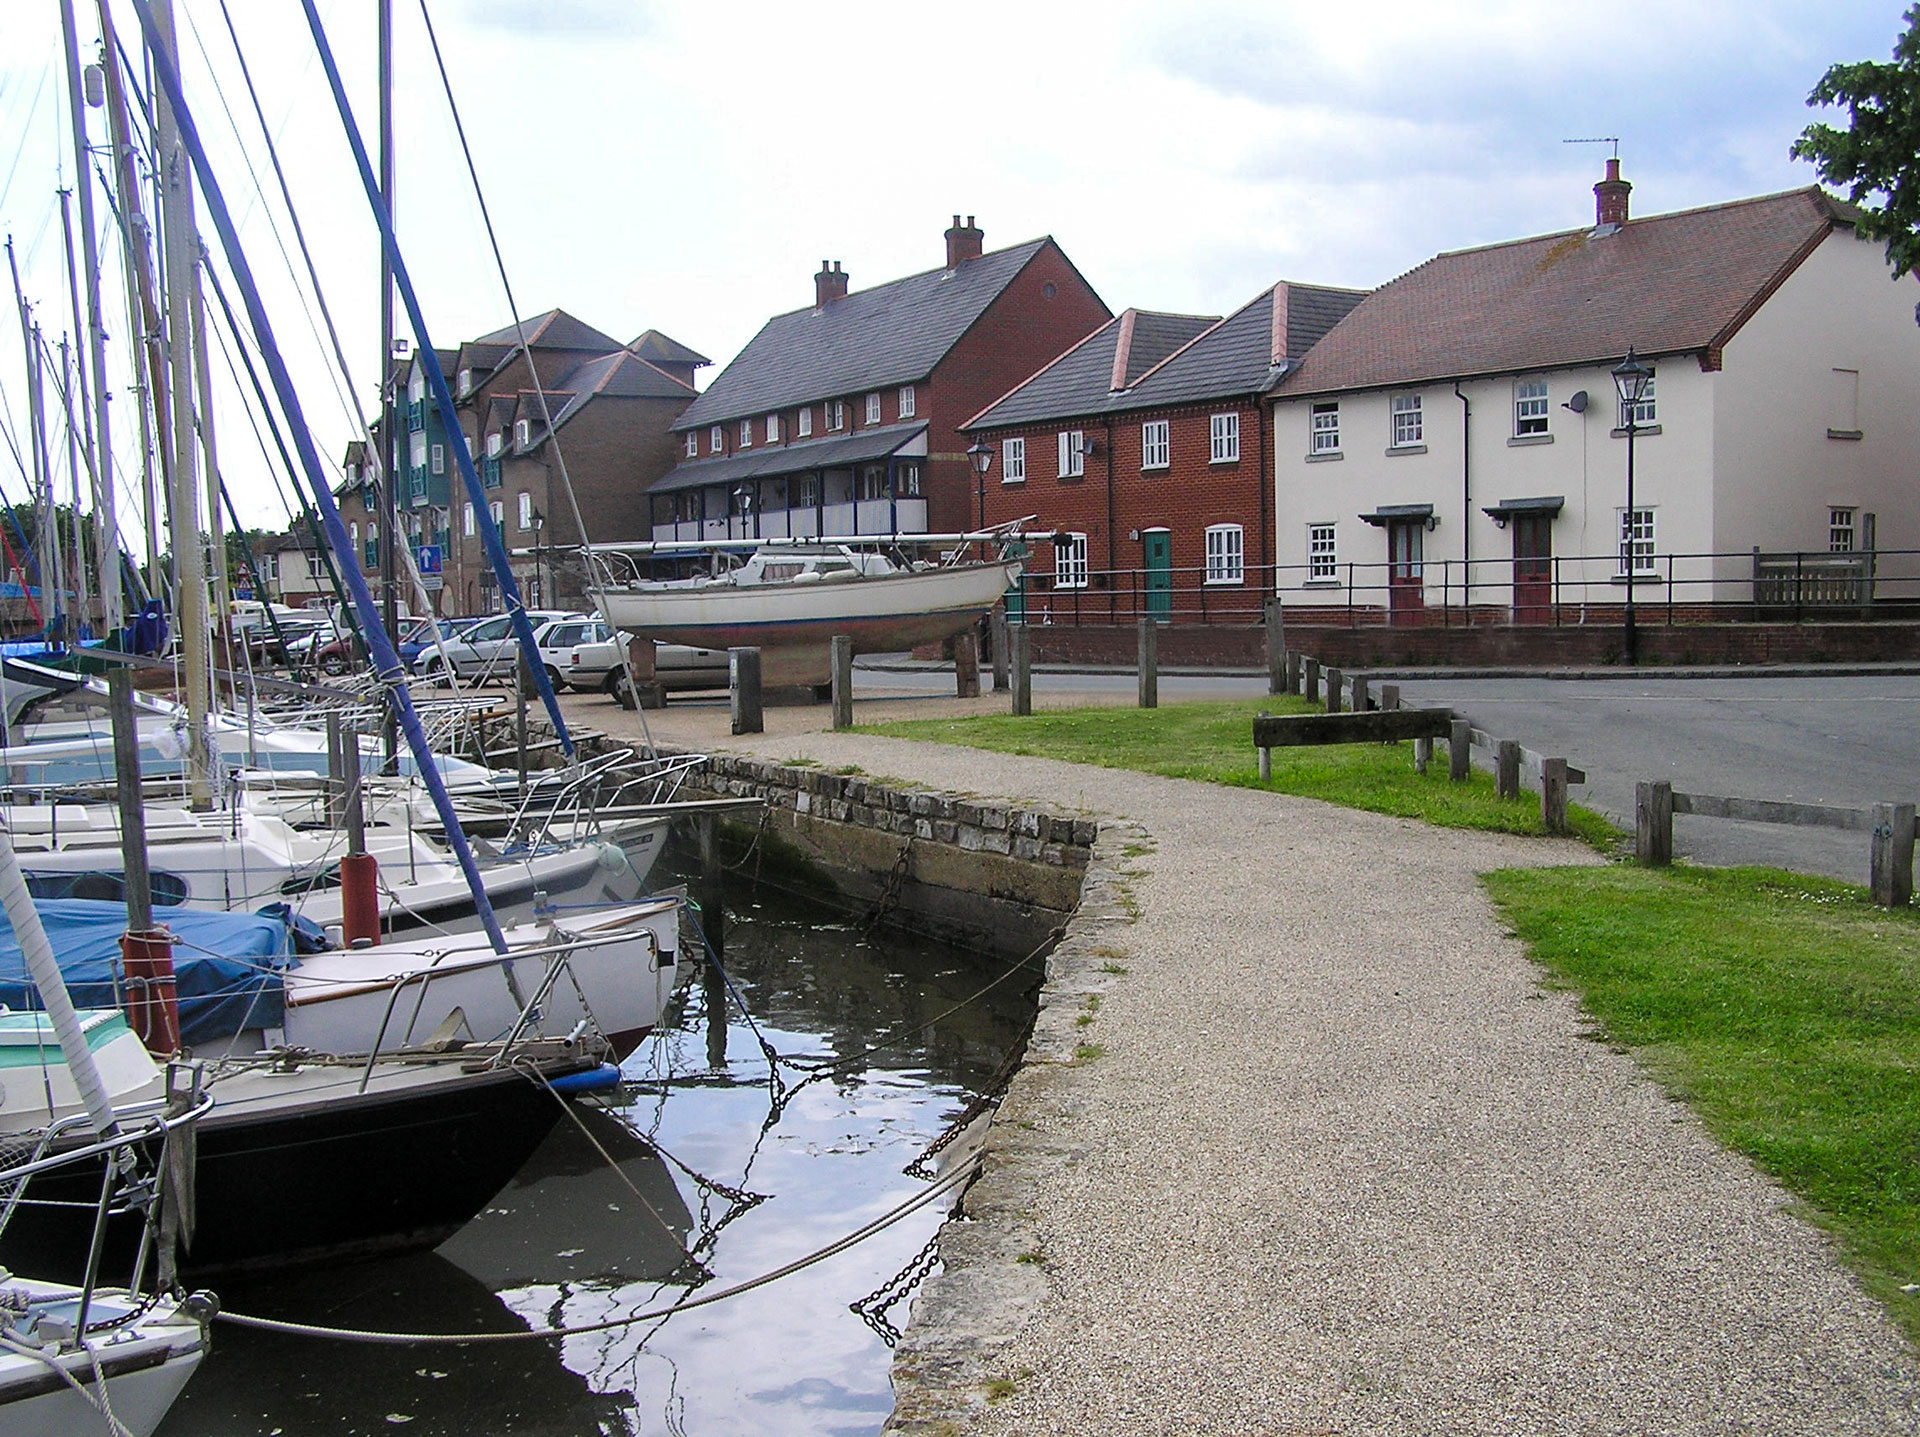 walkway view of historic quayside with red brick houses